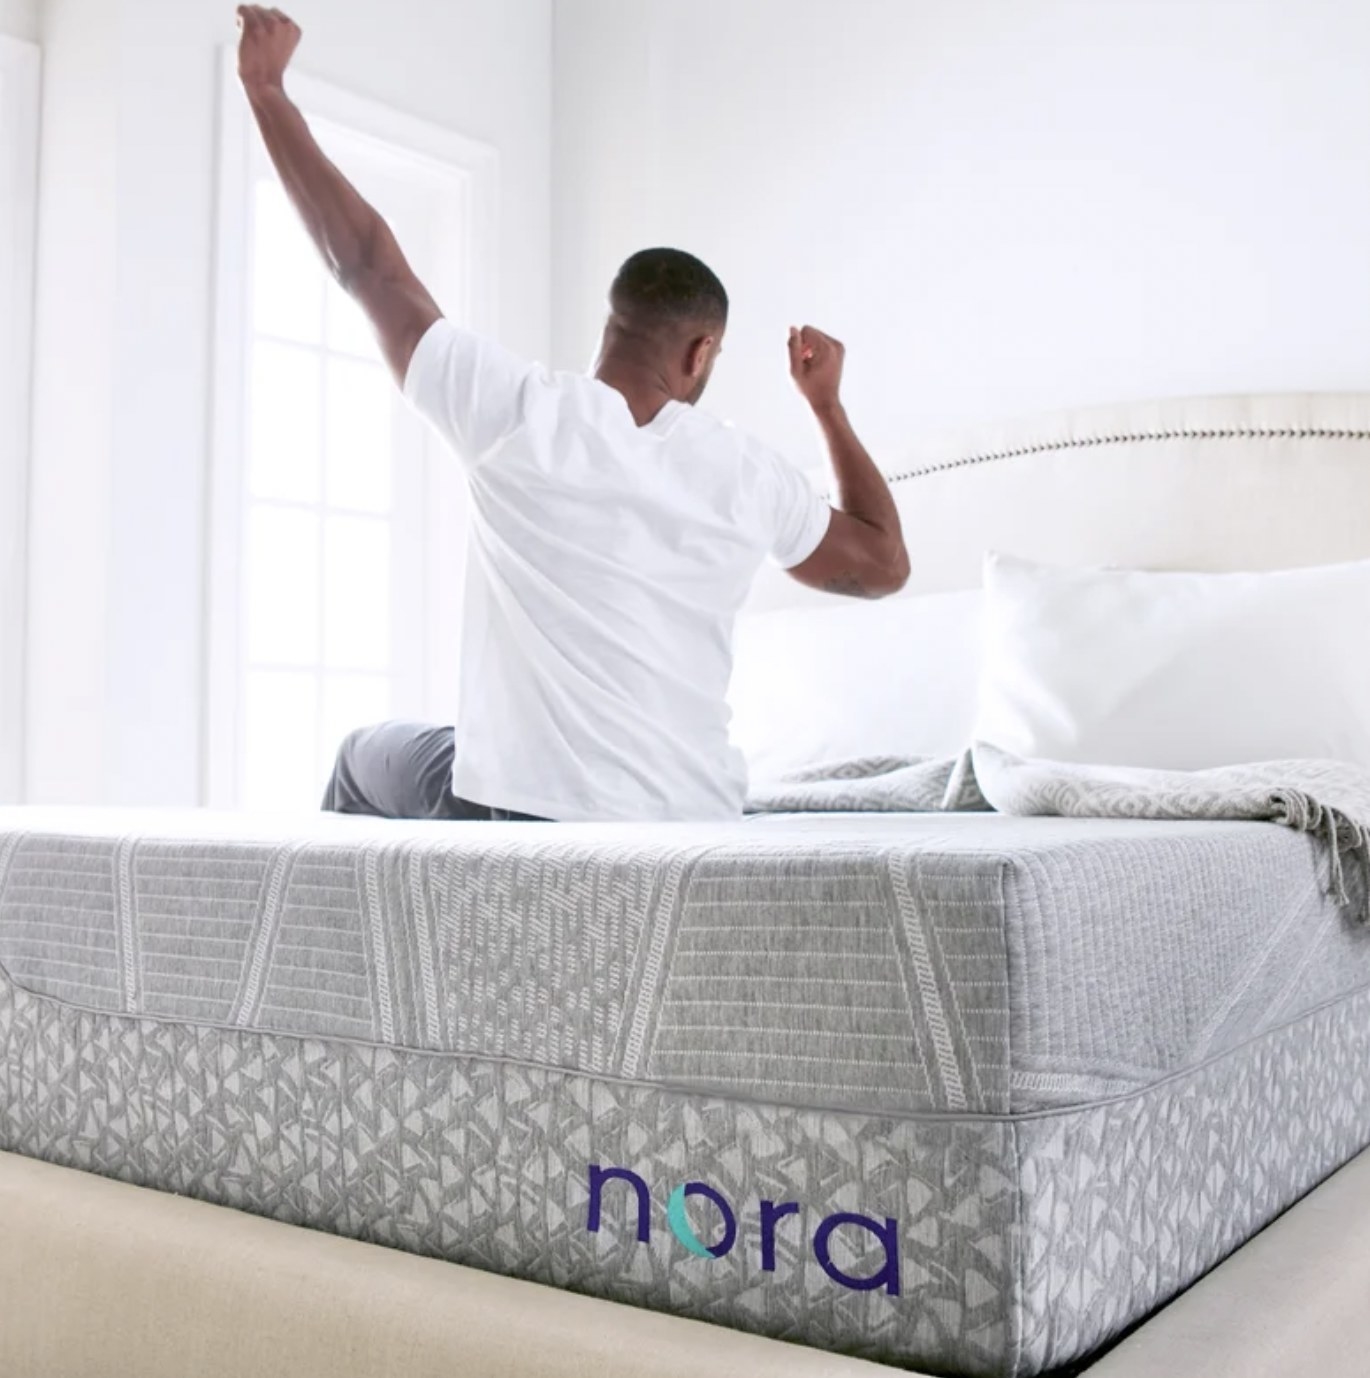 Person sitting on mattress and stretching arms above head